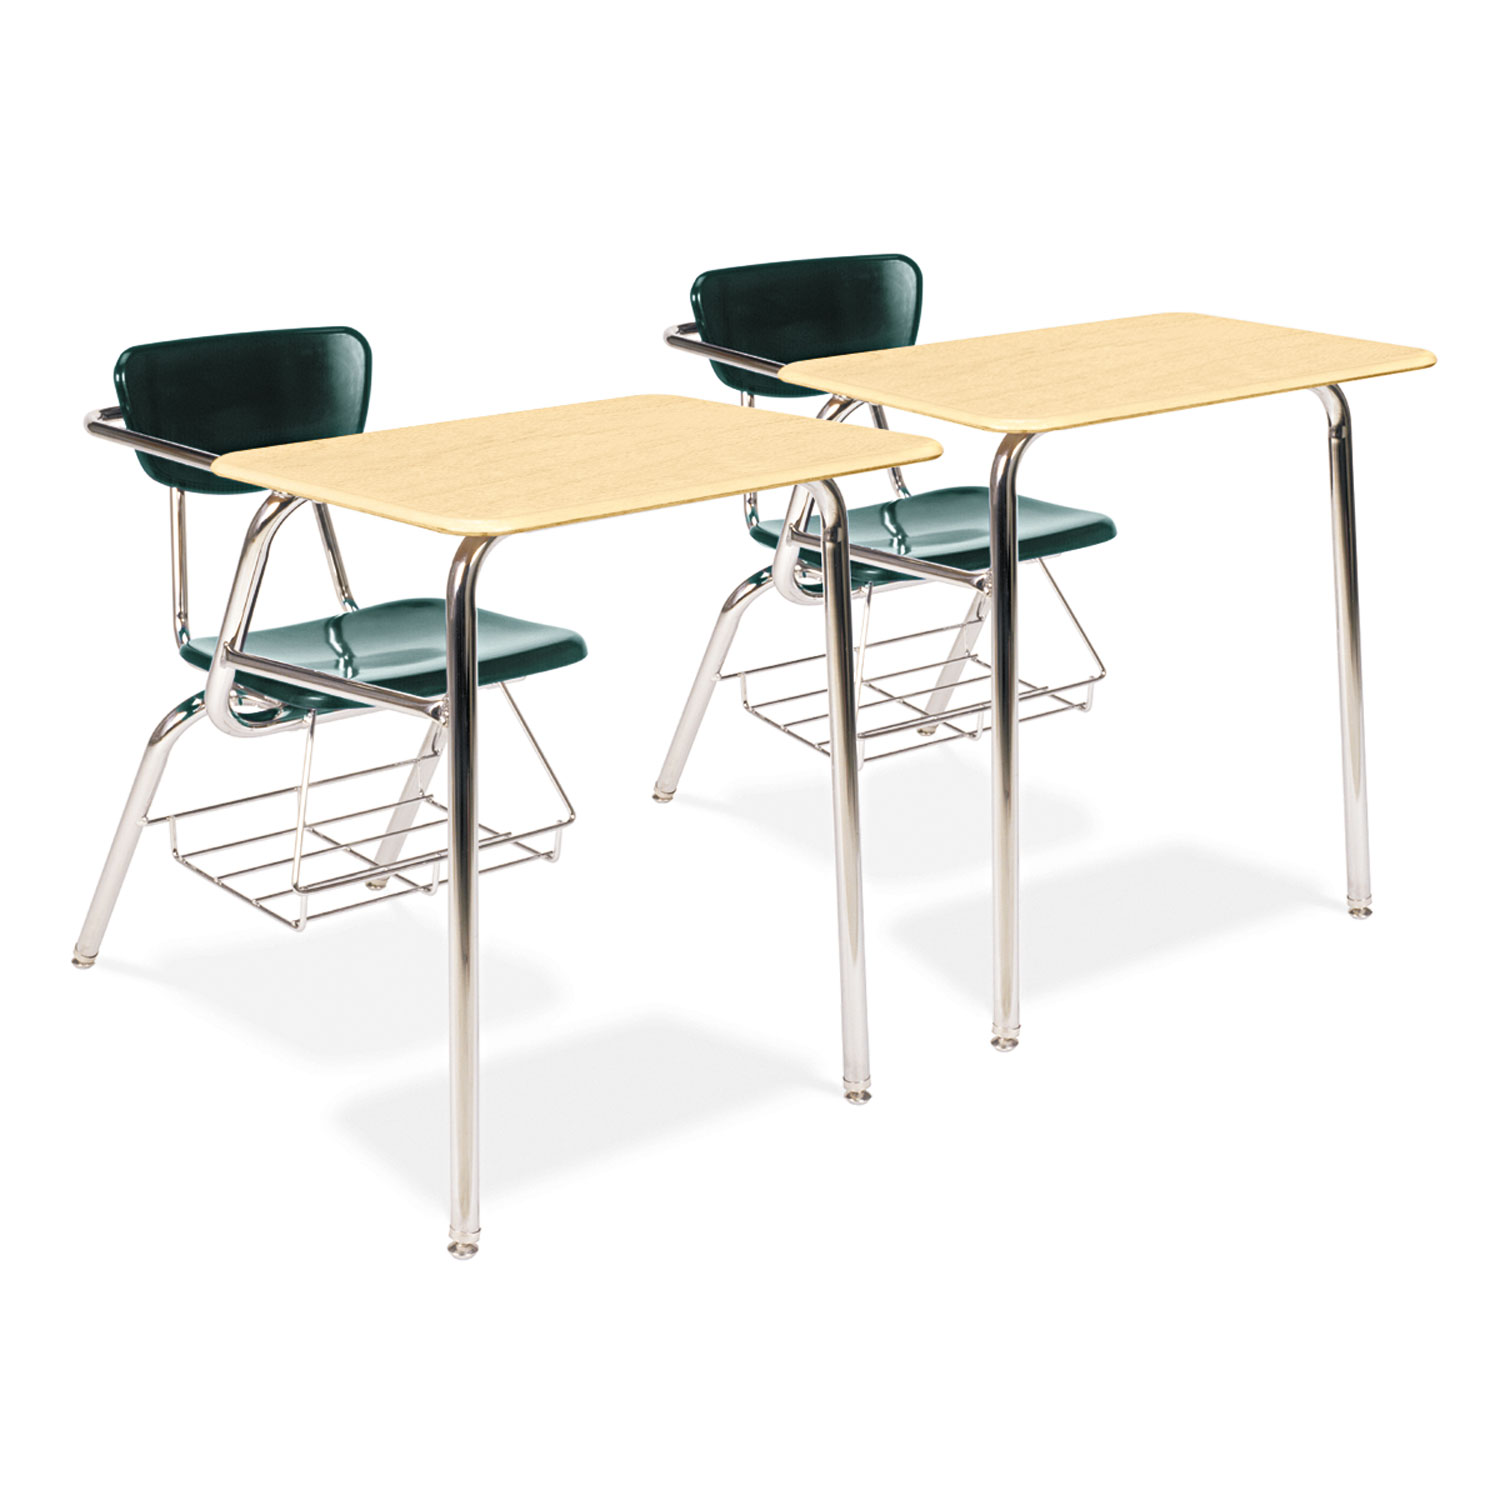 3400 Series Chair Desk, 22-3/4 x 35-3/4 x 29-1/4, Fusion Maple/Forest Green,2/CT